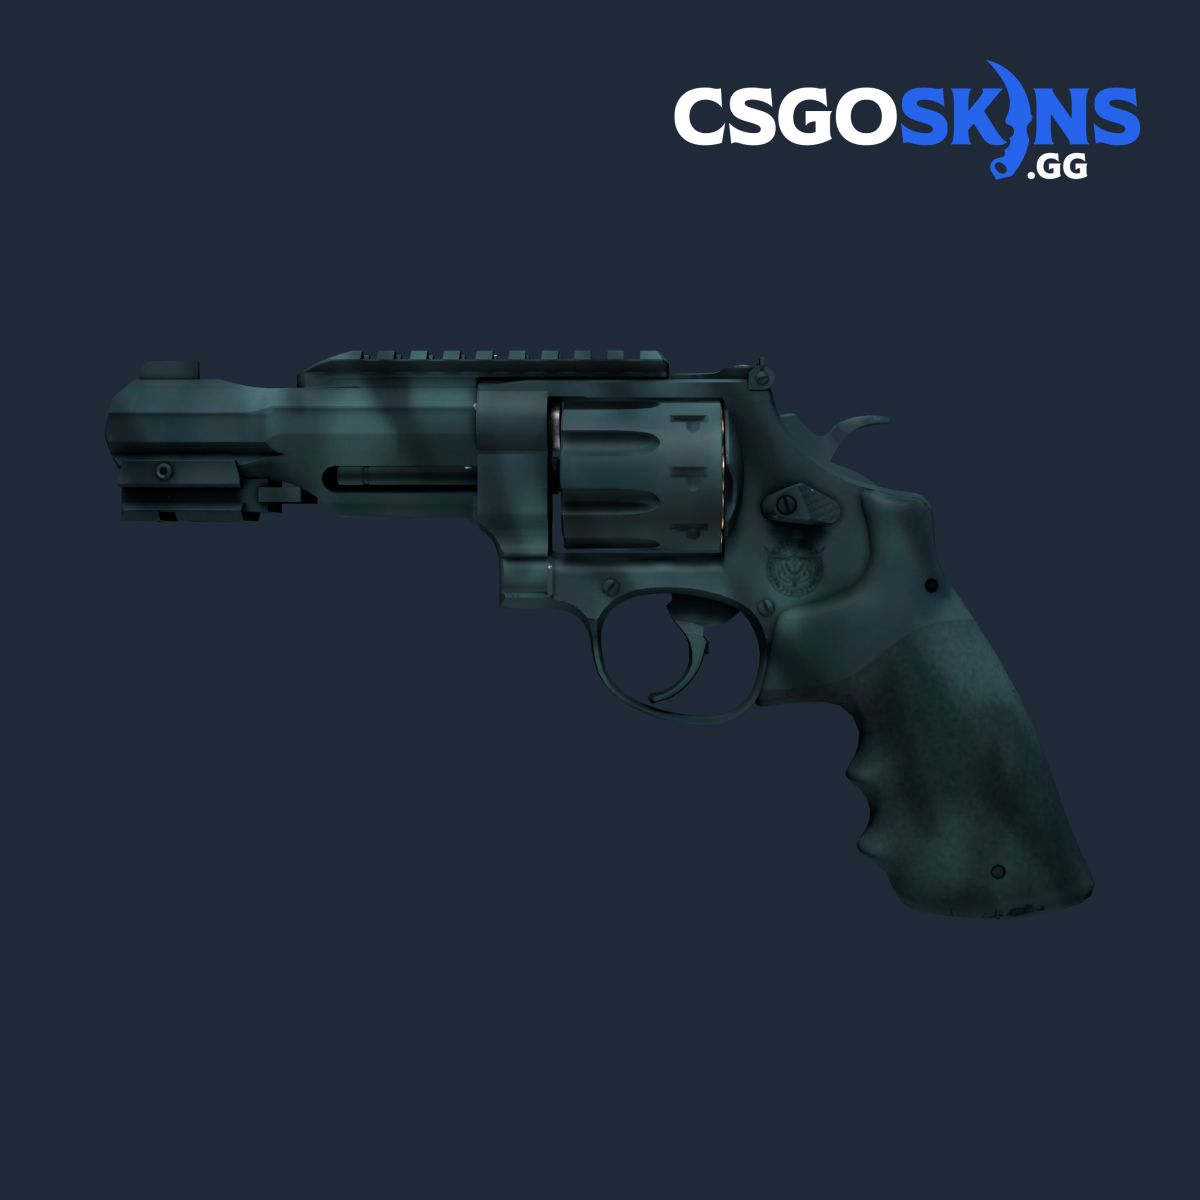 download the last version for ios R8 Revolver Canal Spray cs go skin